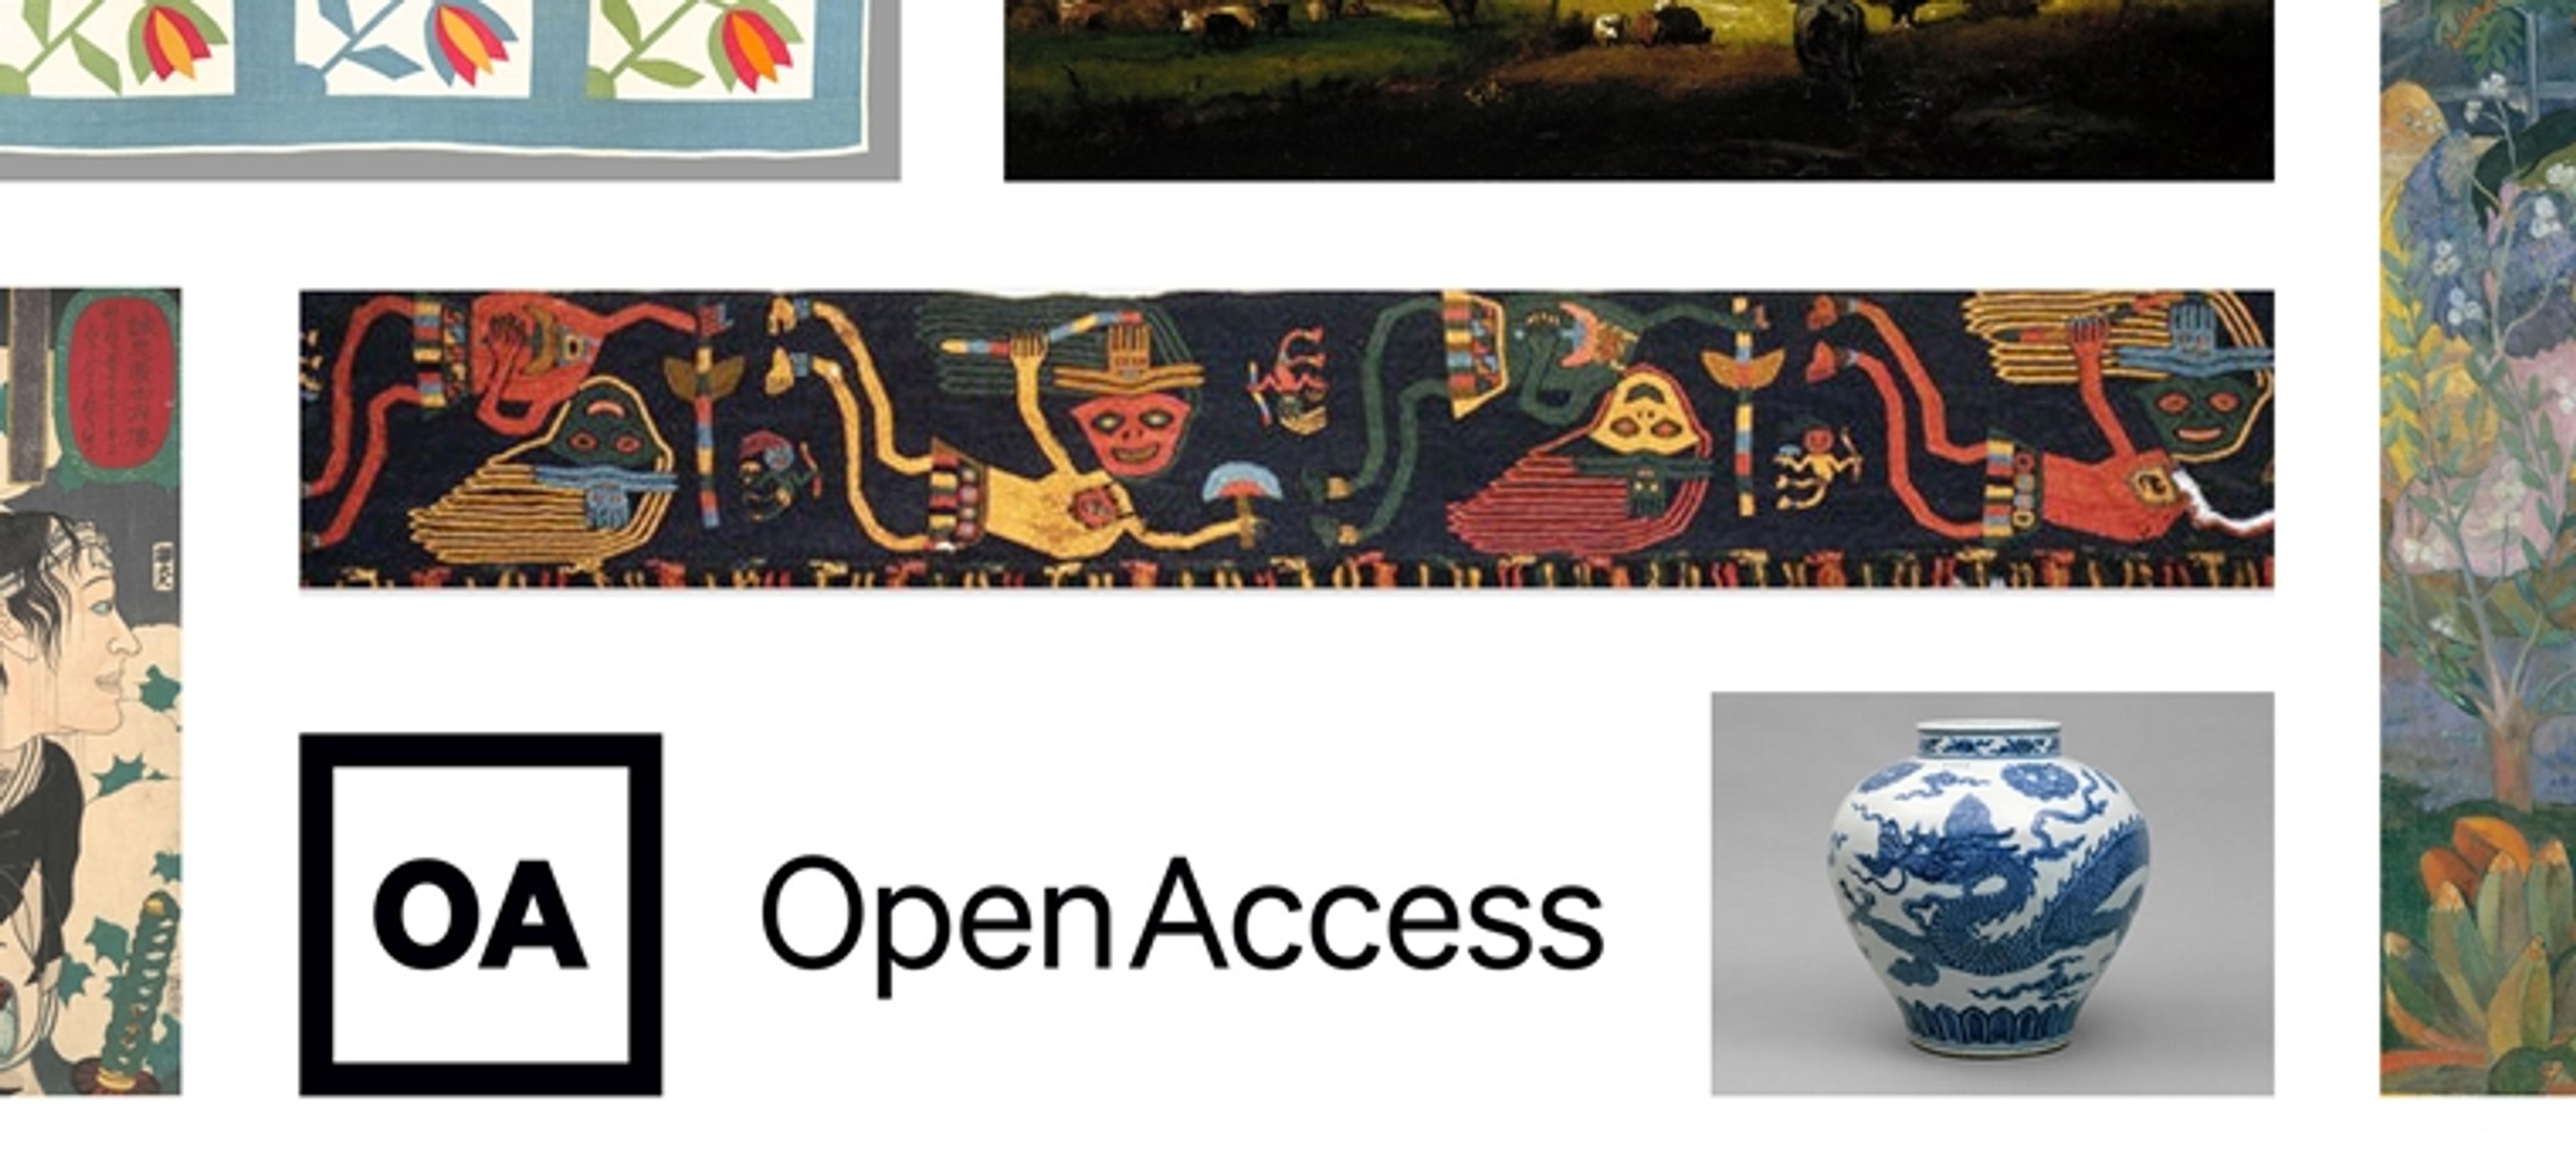 Open Access images in The Met collection